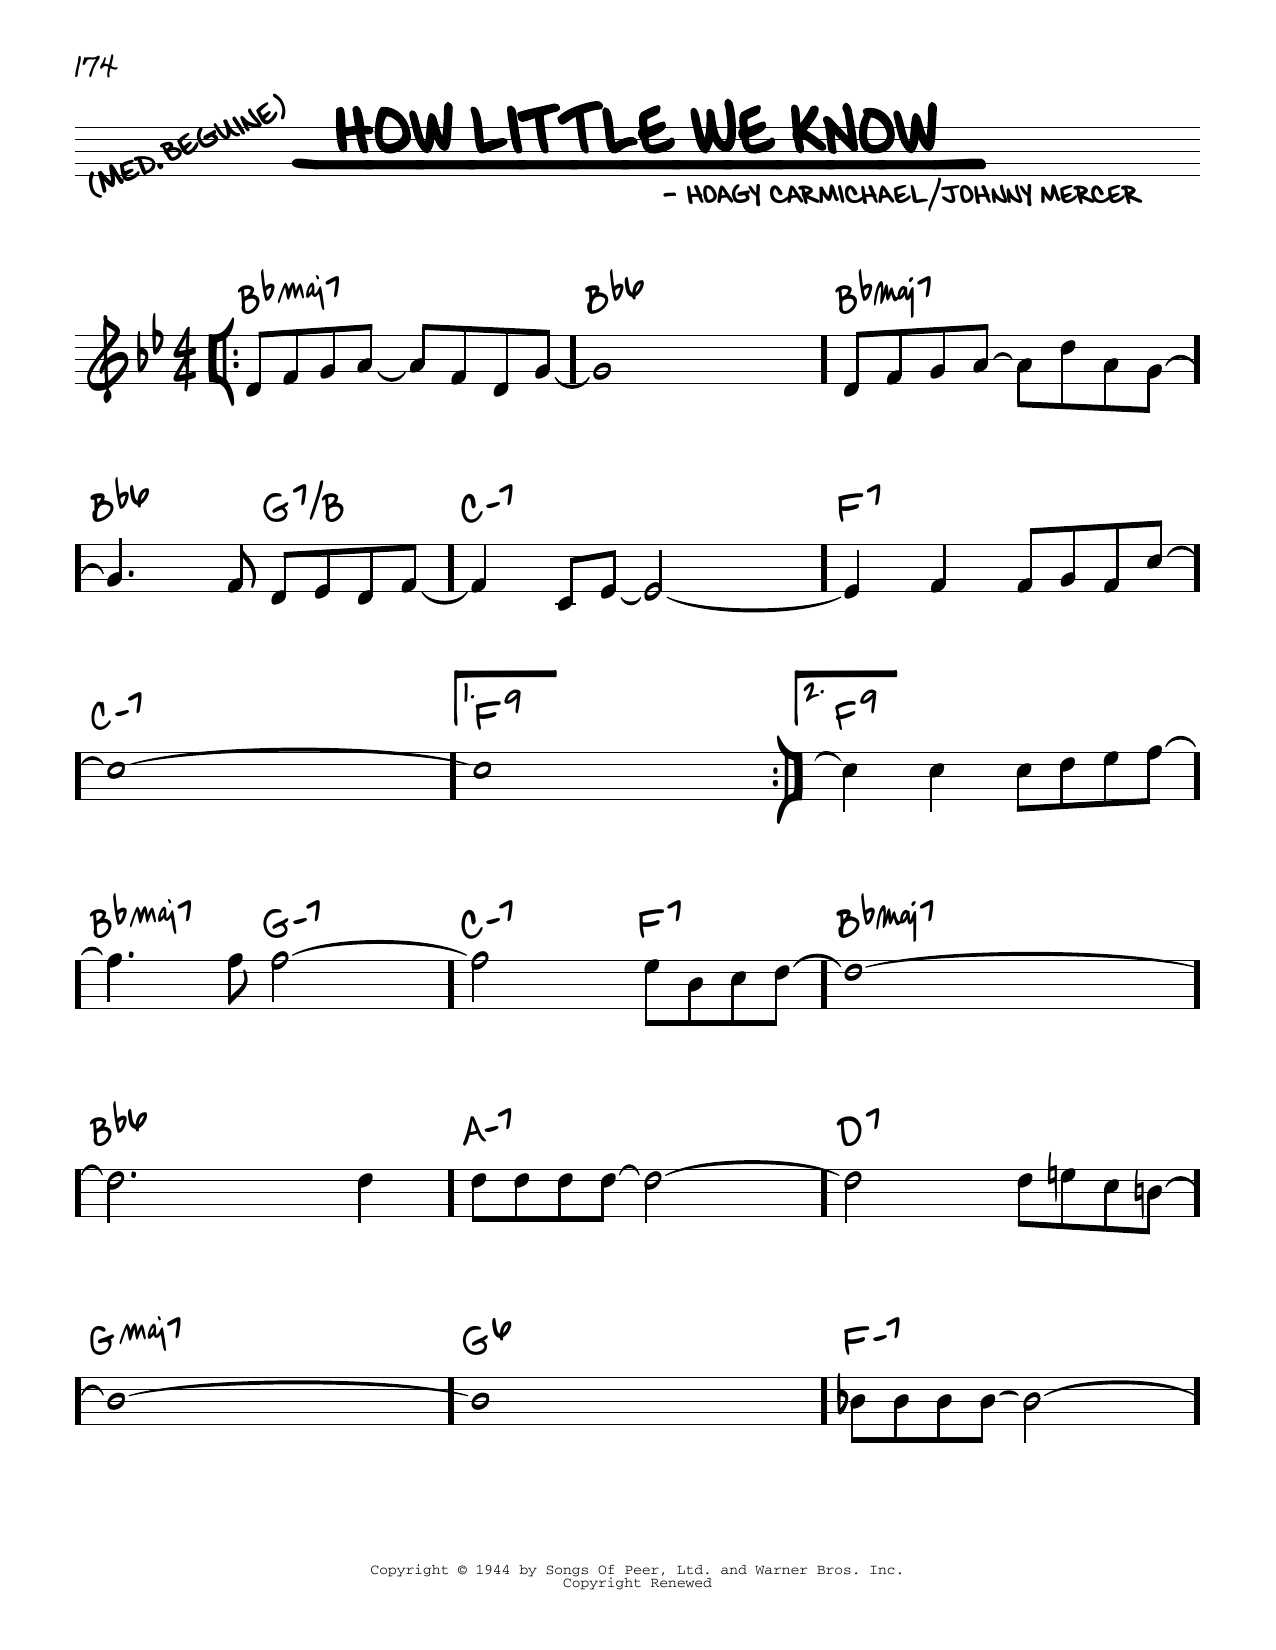 Download Hoagy Carmichael How Little We Know Sheet Music